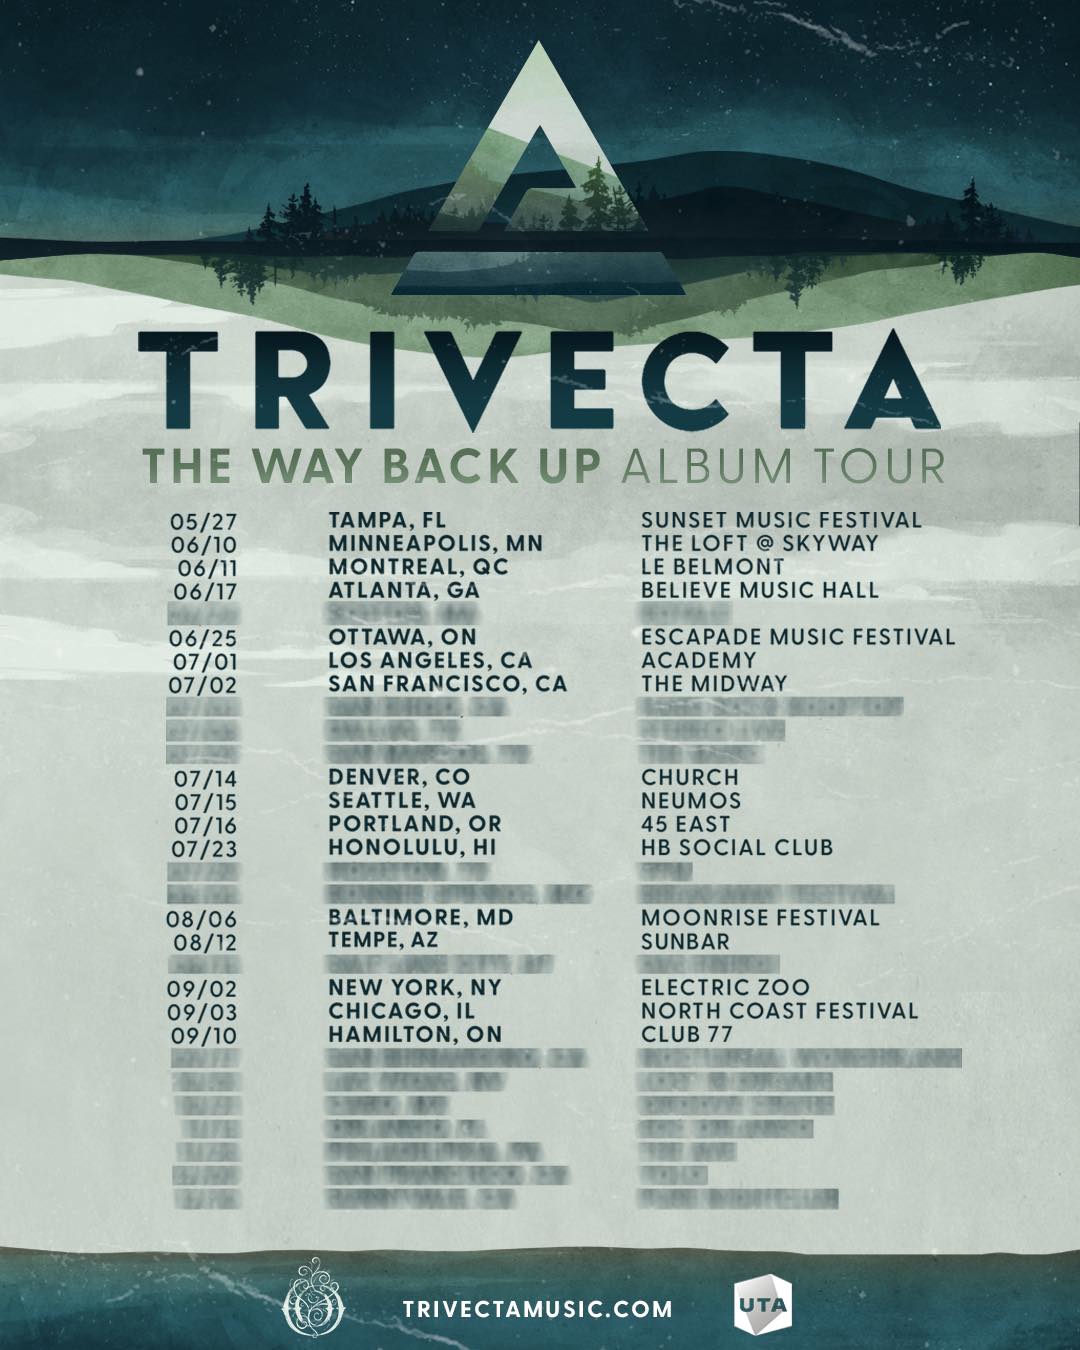 Trivecta The Way Back Up tour neonowlco neon owl